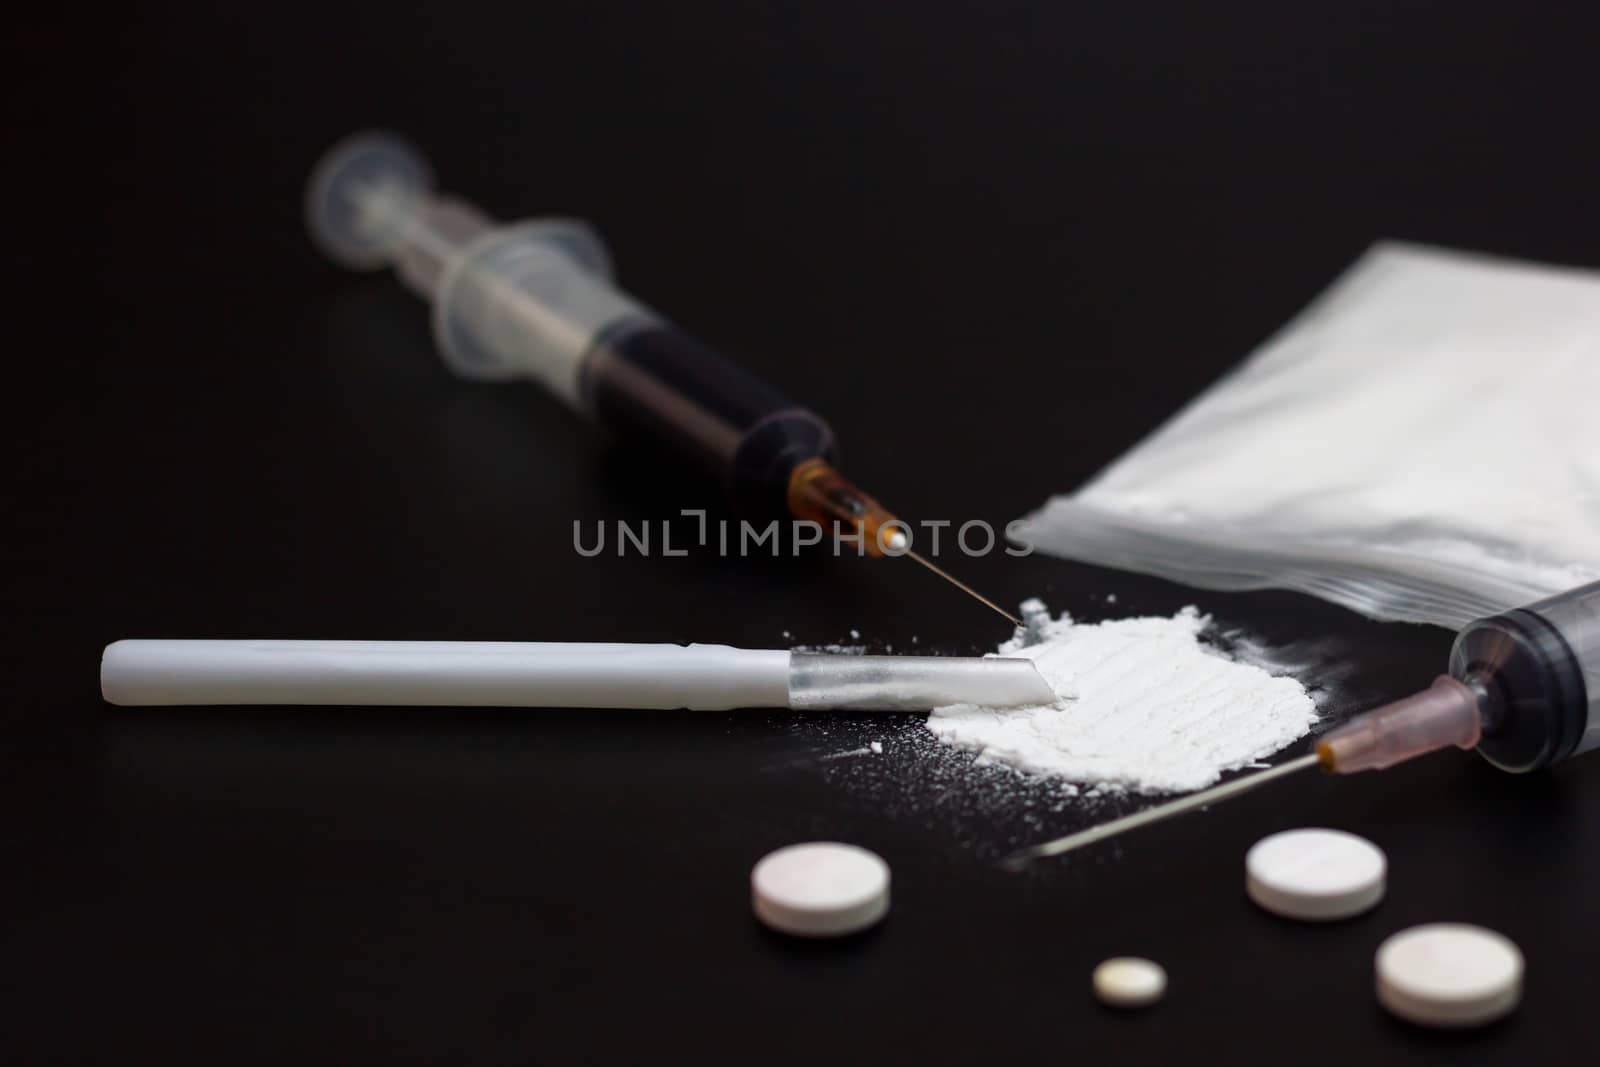 Fake Heroin or diacetylmorphine bag and syringes placed side by side. Low key addictive substance on darkness background.